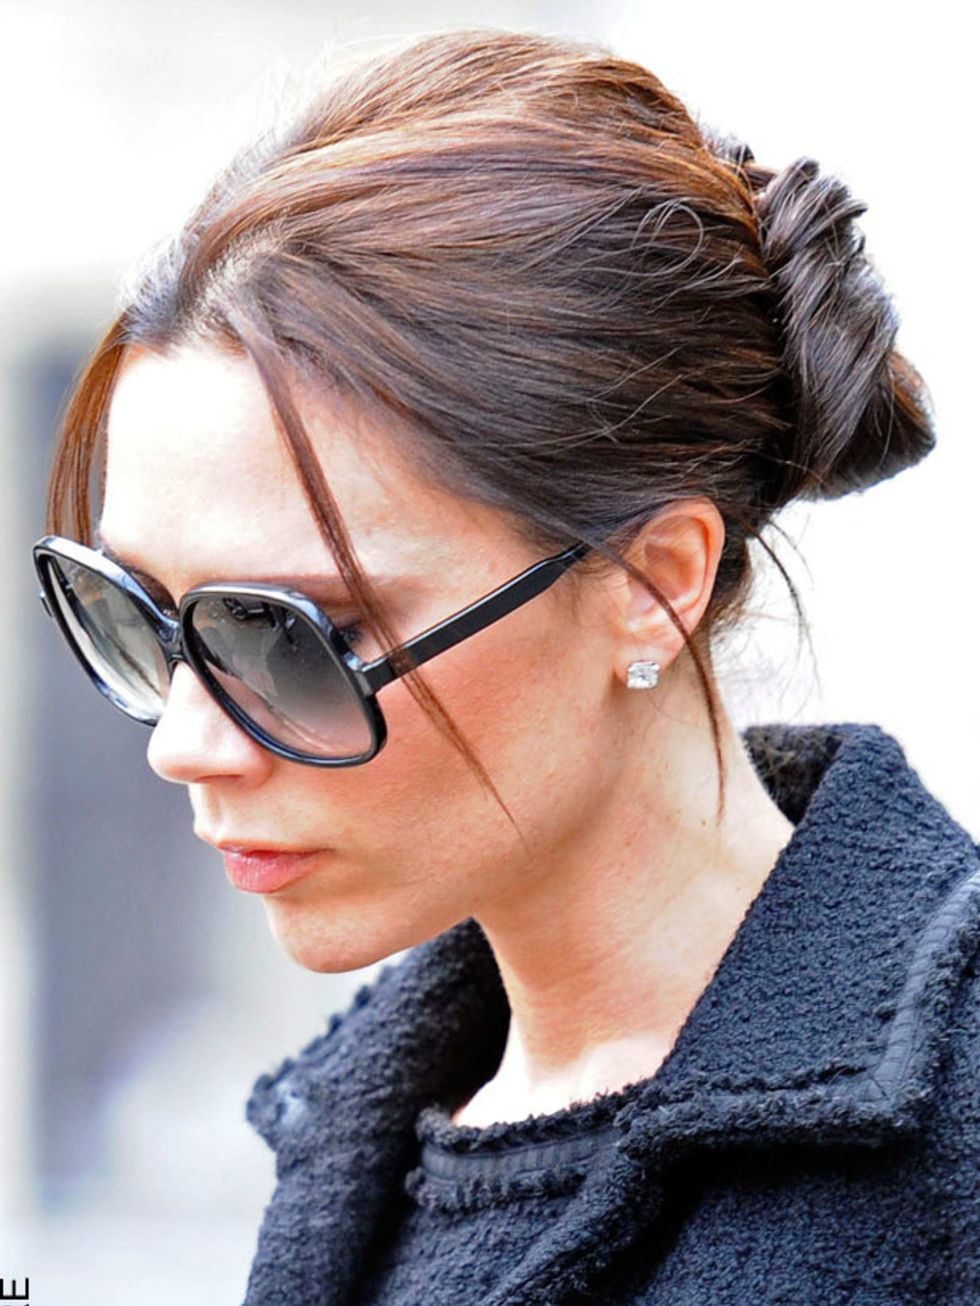 <p>6. Finally, if you want your hairstyle to have real staying power Neil advises finishing with Bbs Classic Hairspray, £9.75, misted over the style. <a href="http://blogs.elleuk.com/beauty-notes-daily/2010/01/14/victoria-beckham-voted-most-iconic-hair